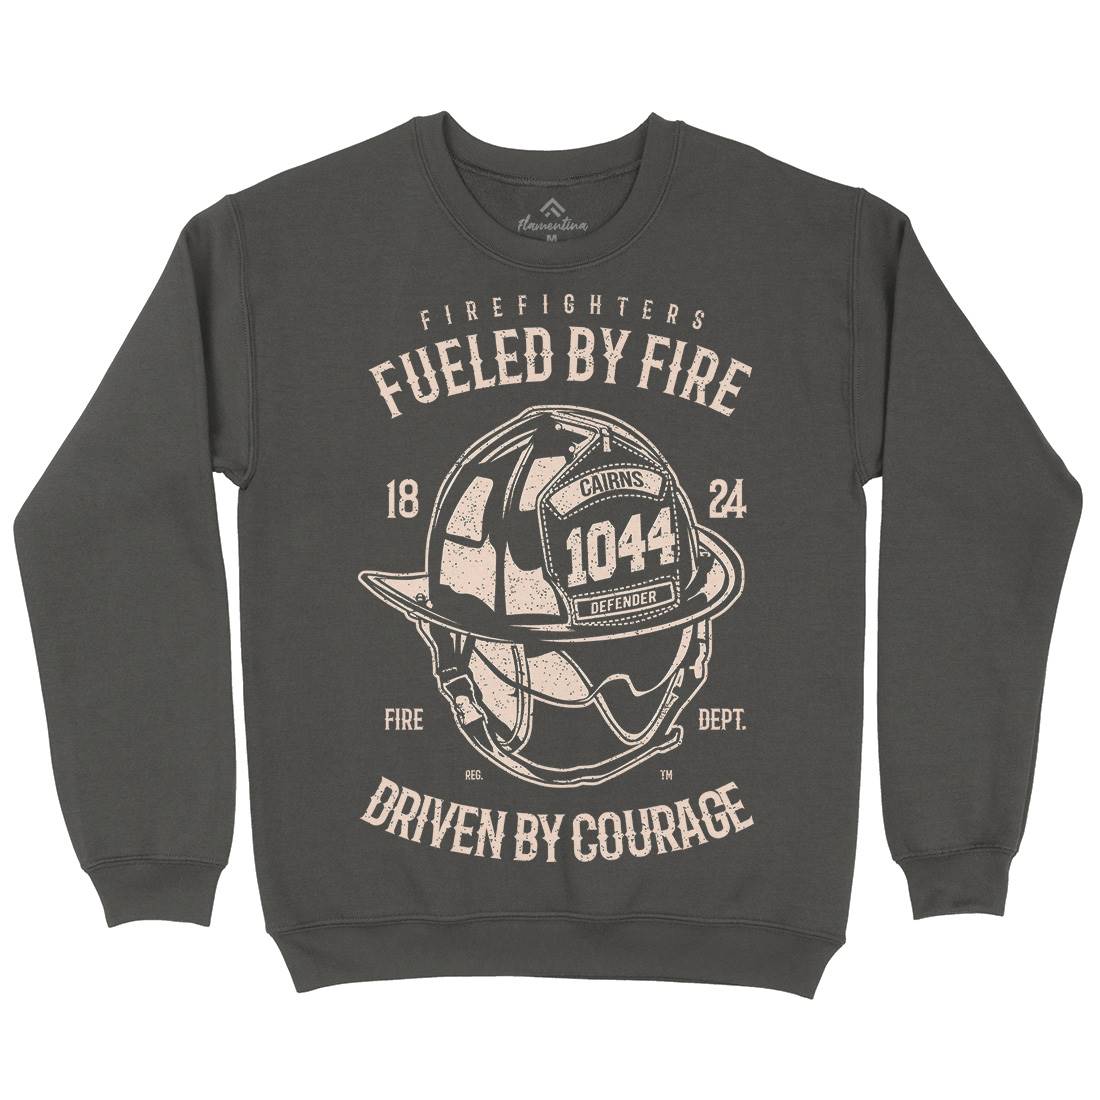 Fuelled By Fire Mens Crew Neck Sweatshirt Firefighters A667